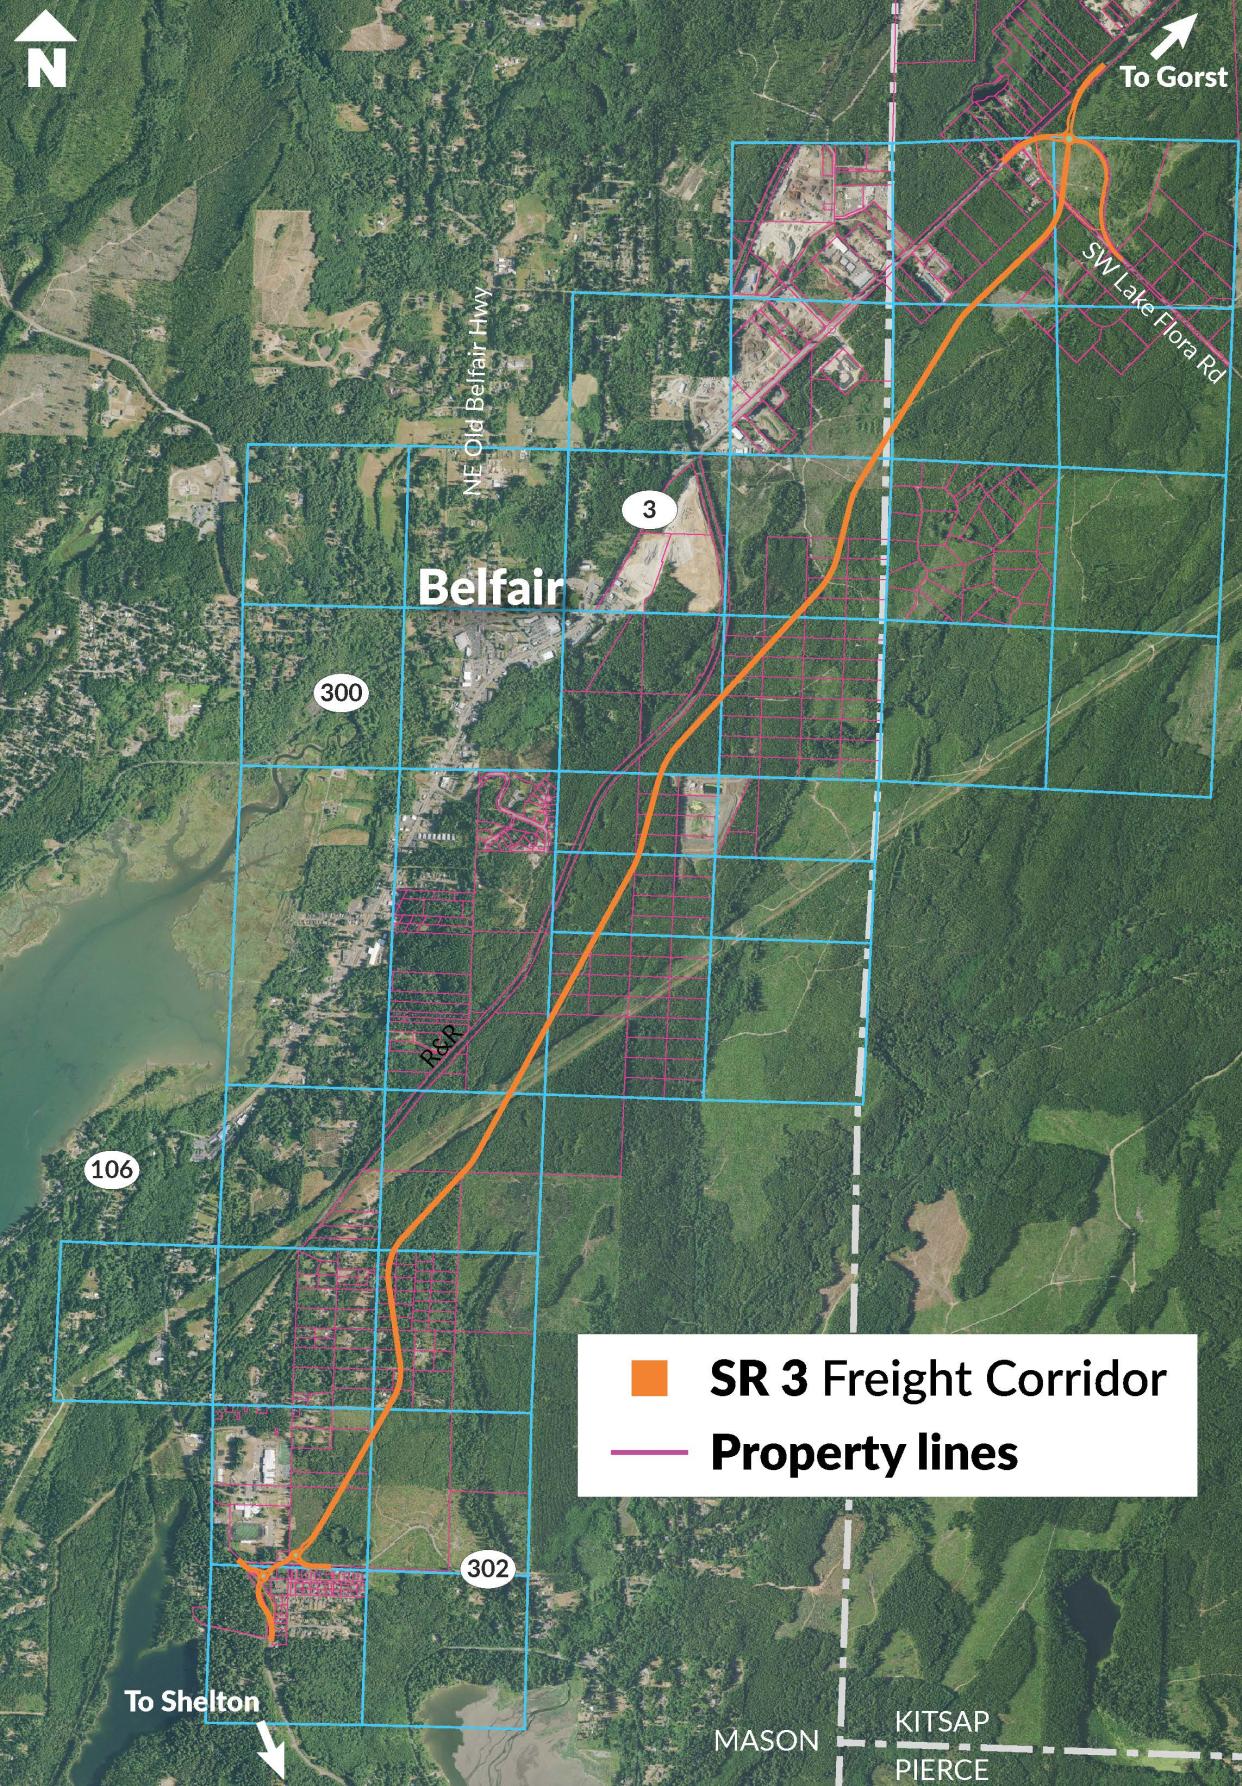 The photo shows WSDOT's current design of its Highway 3 freight corridor project, also known as the Belfair Bypass.